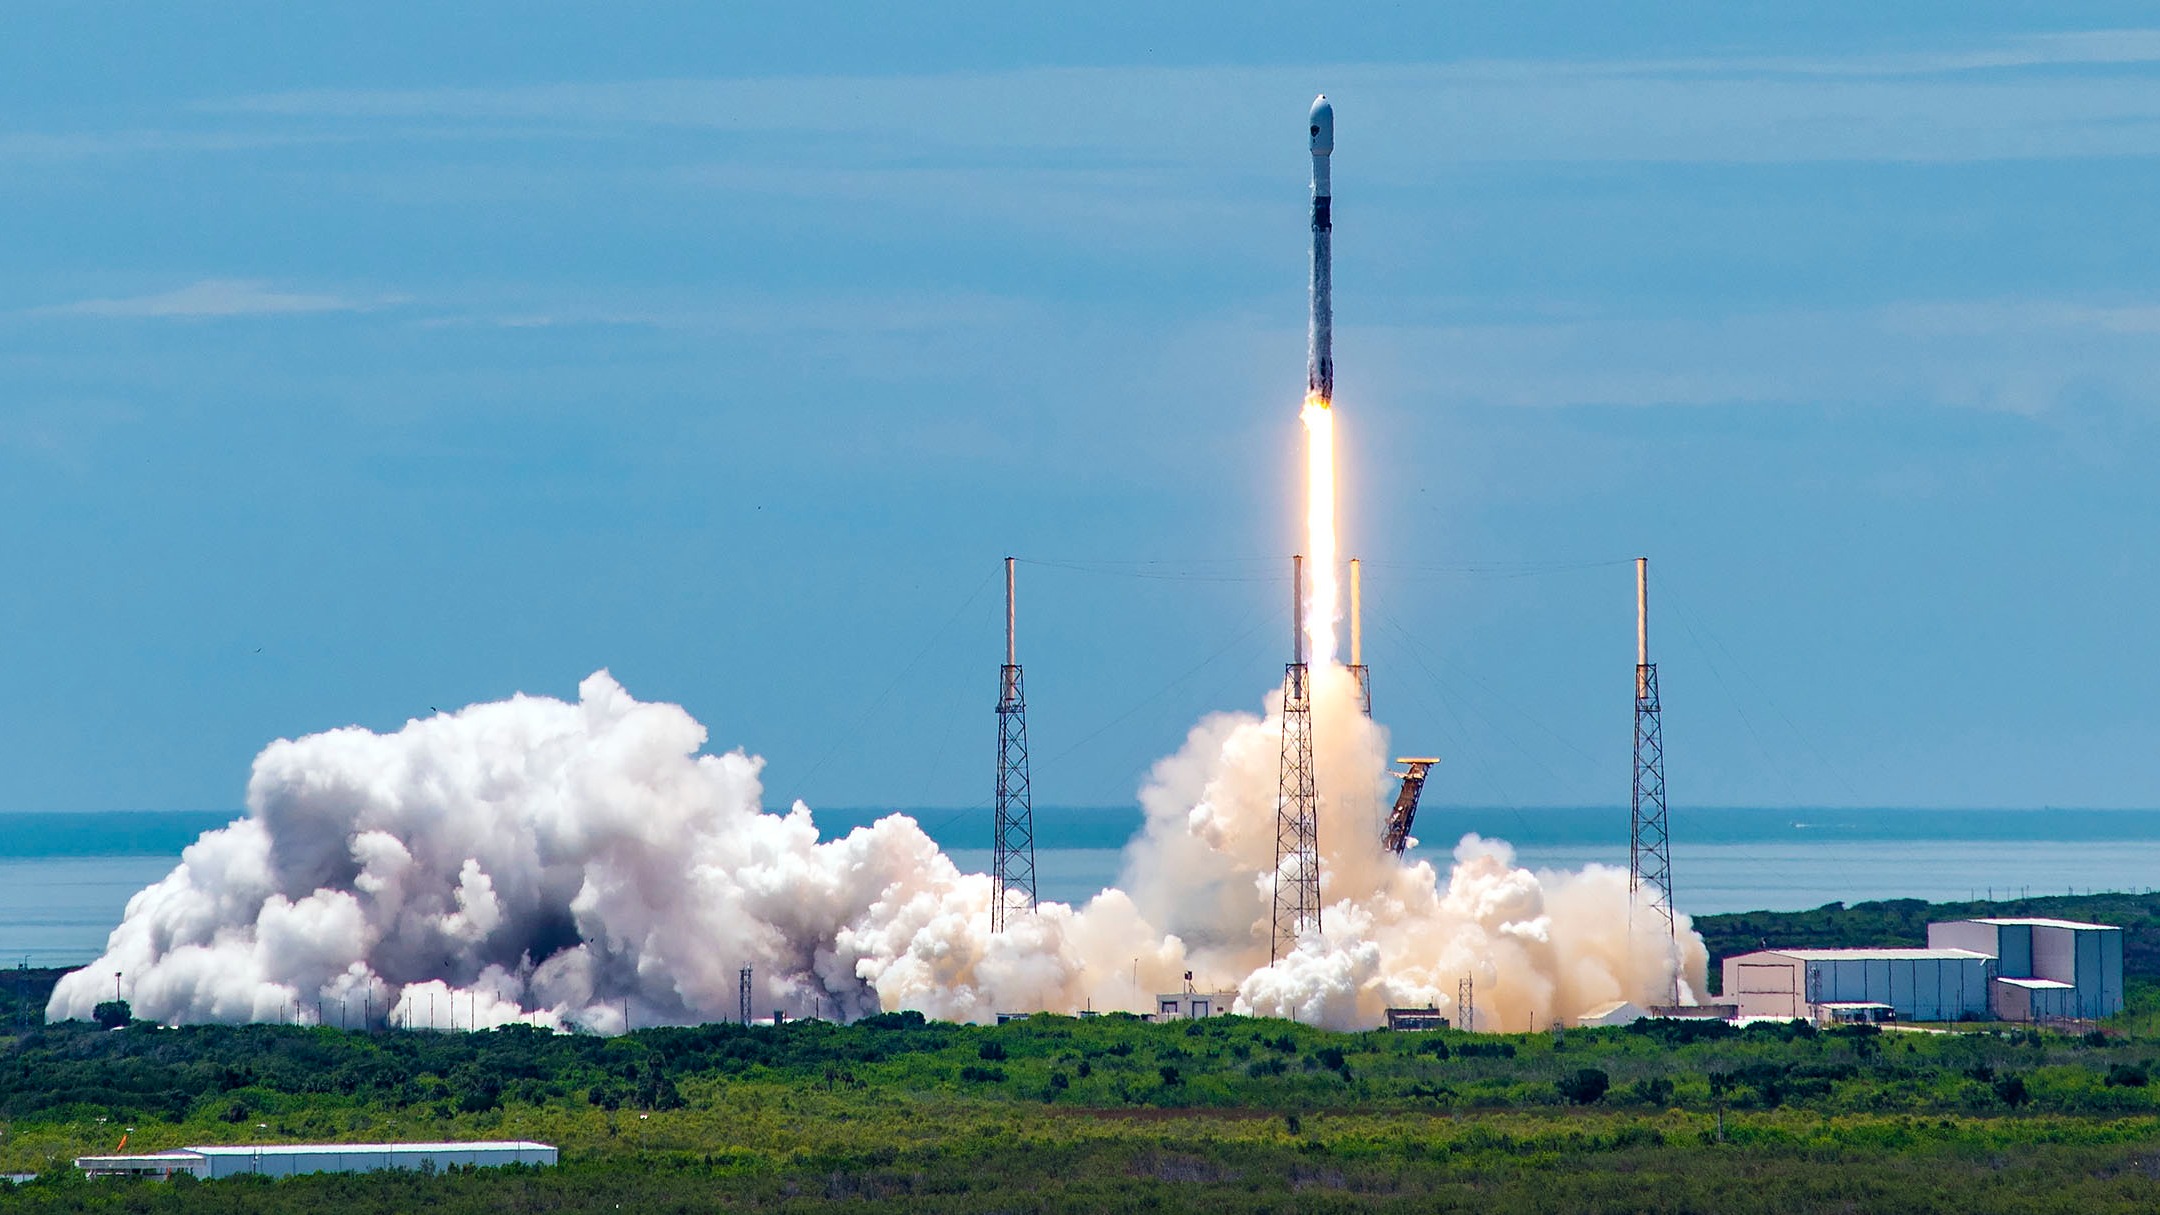 SpaceX launch doubleheader! Watch 2 Falcon 9 rockets fly 9 hours apart on Feb. 17